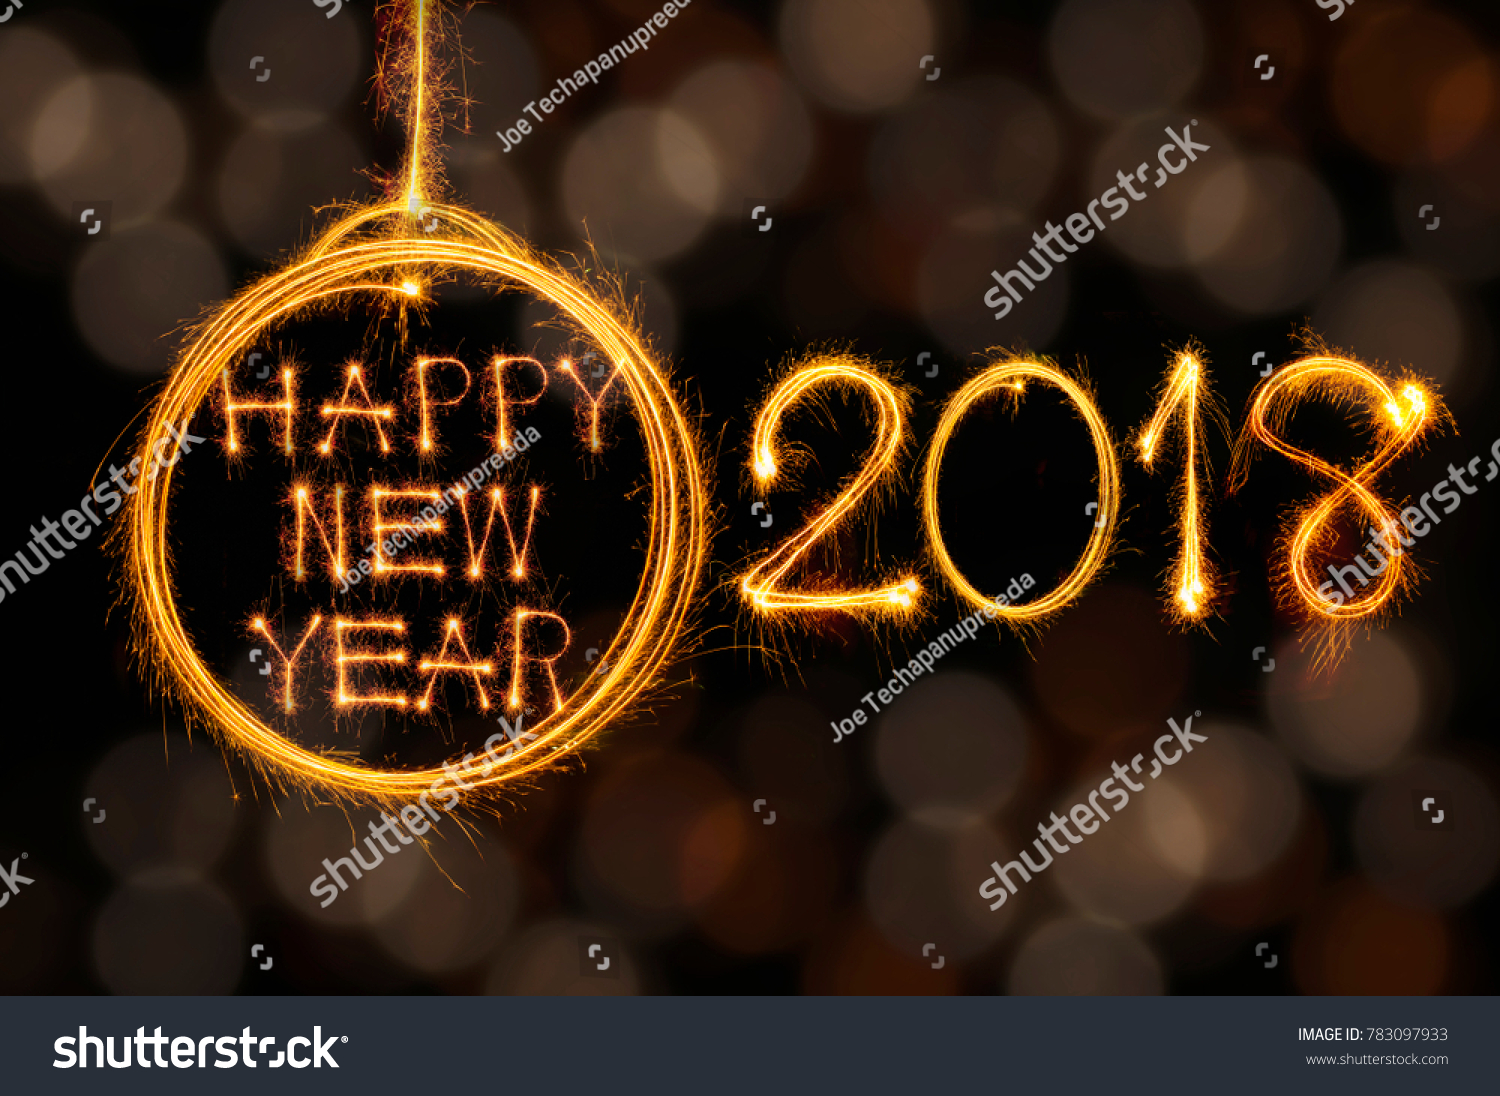 Hang Happy new year text in ball and 2018 written with sparkle fireworks on gold bokeh background #783097933